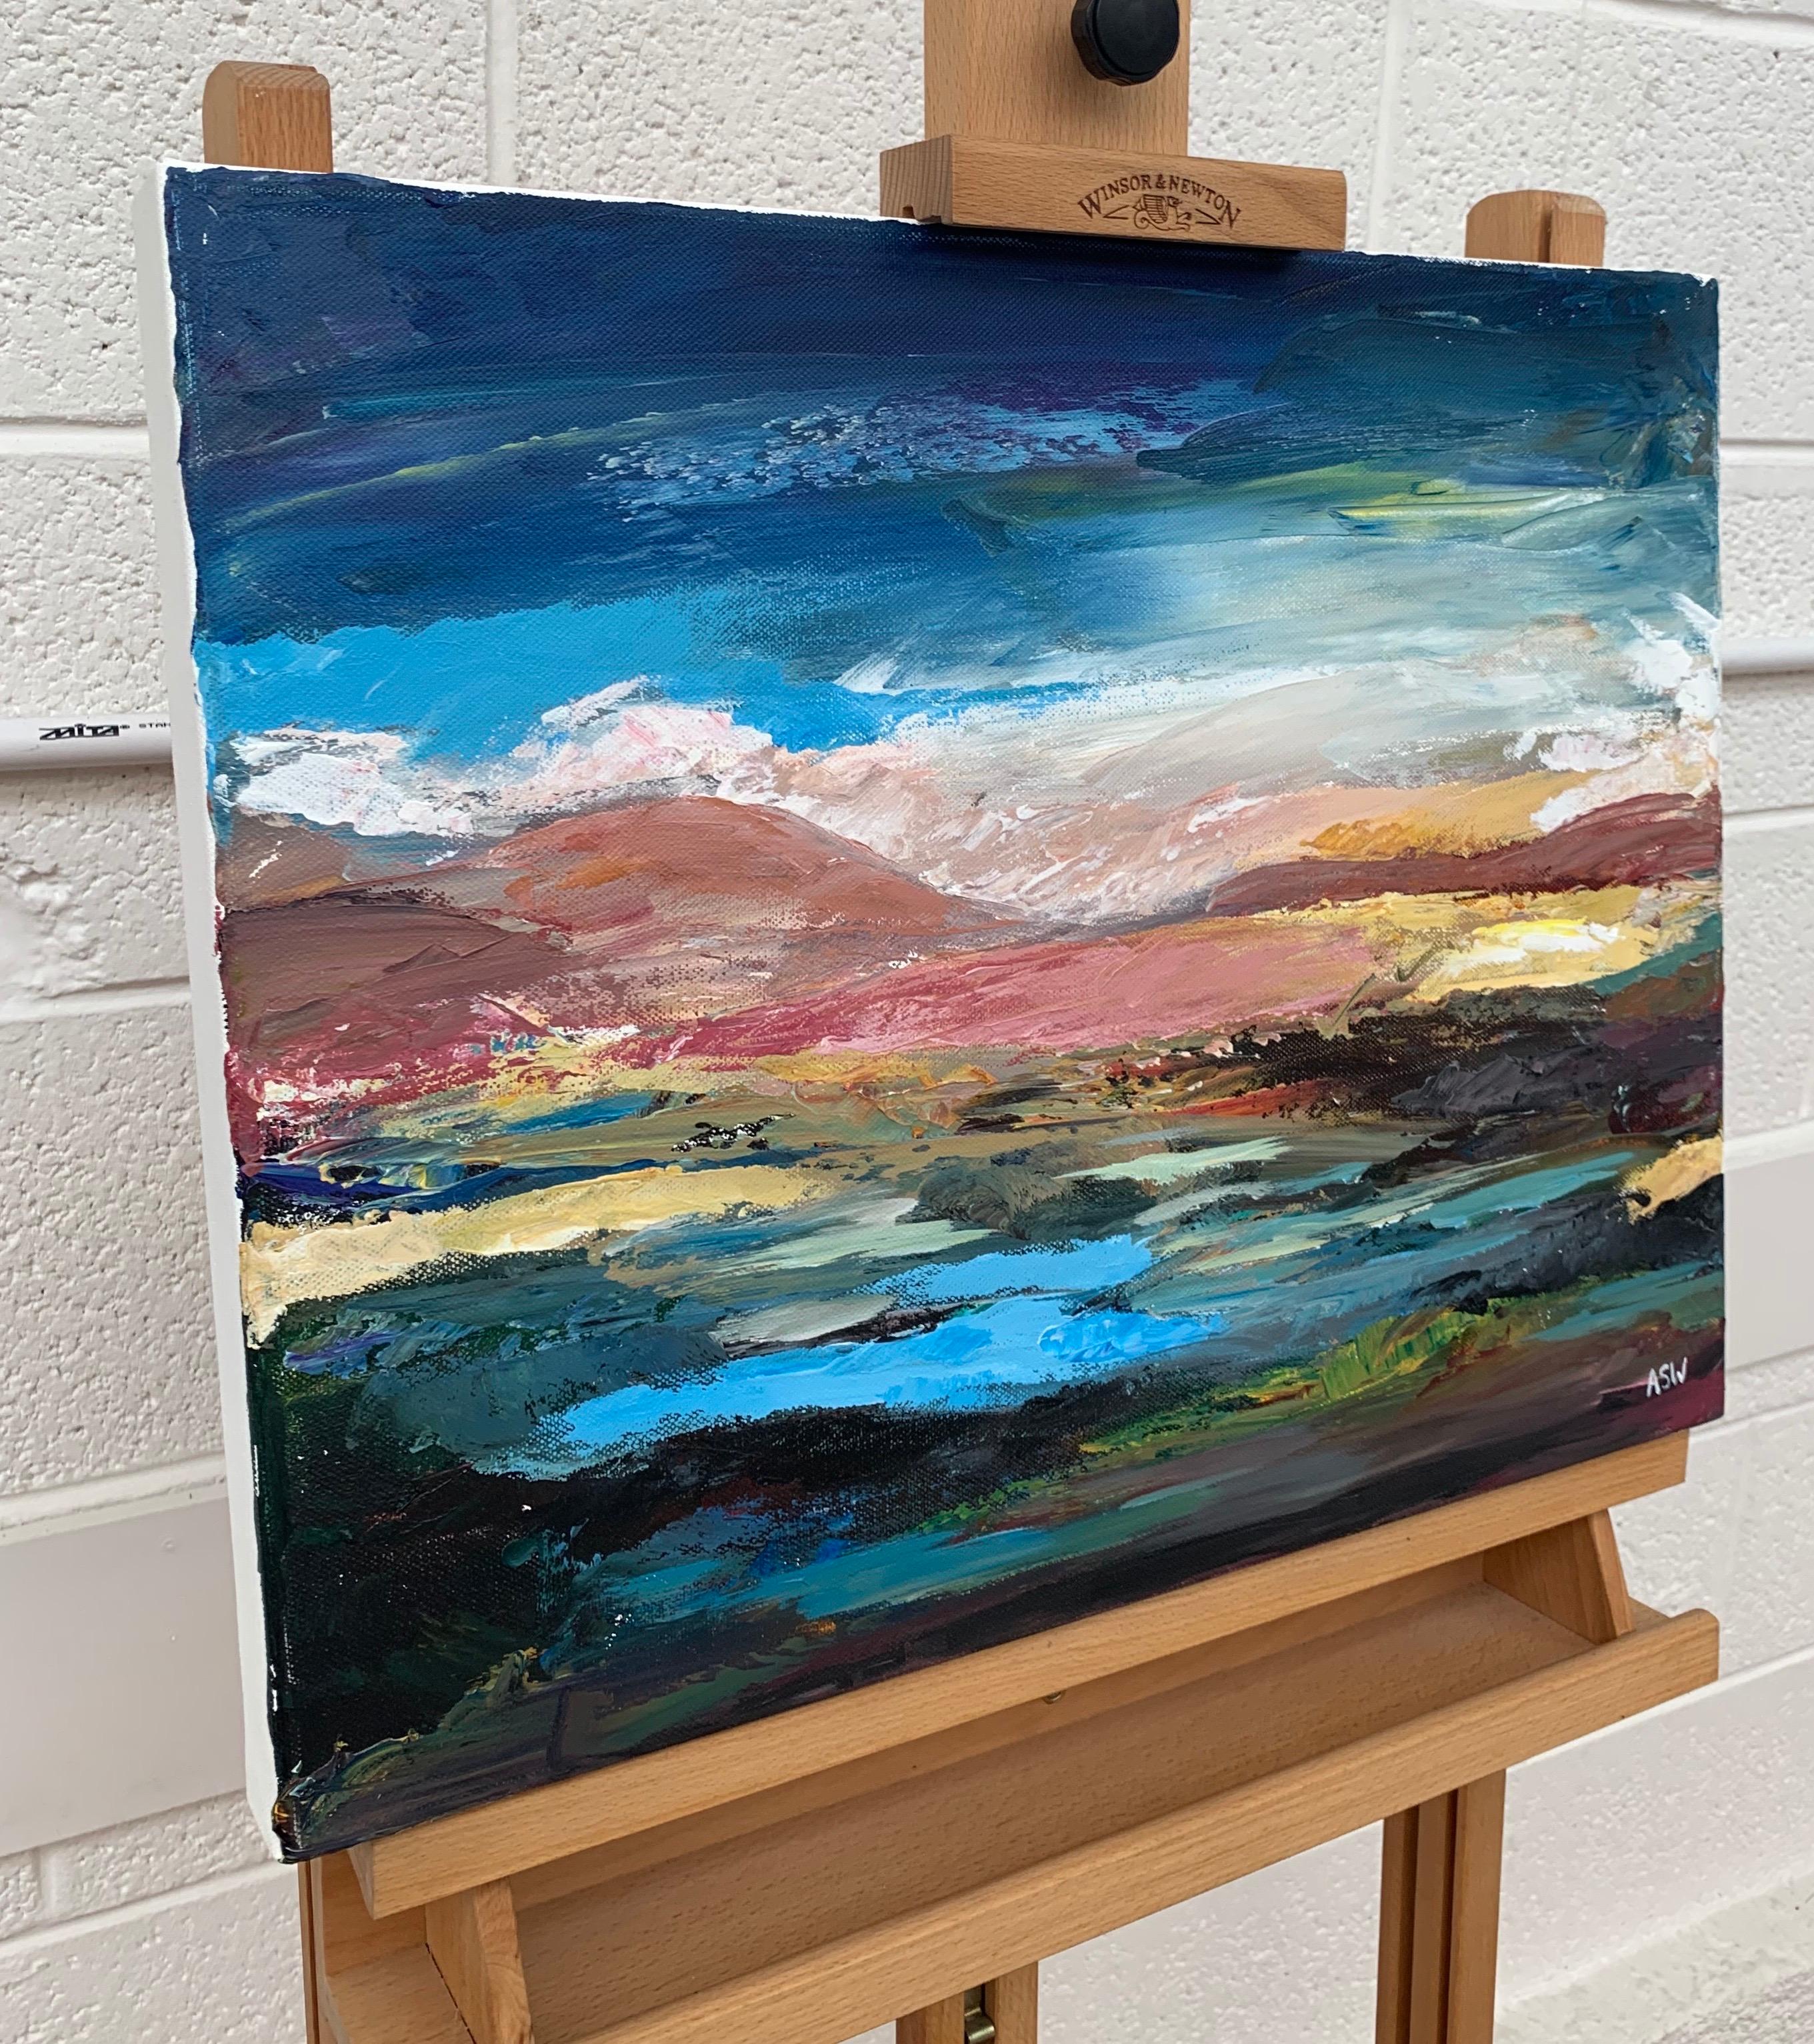 Colourful Expressive Abstract Mountain Landscape by Contemporary British Artist  - Gray Landscape Painting by Angela Wakefield